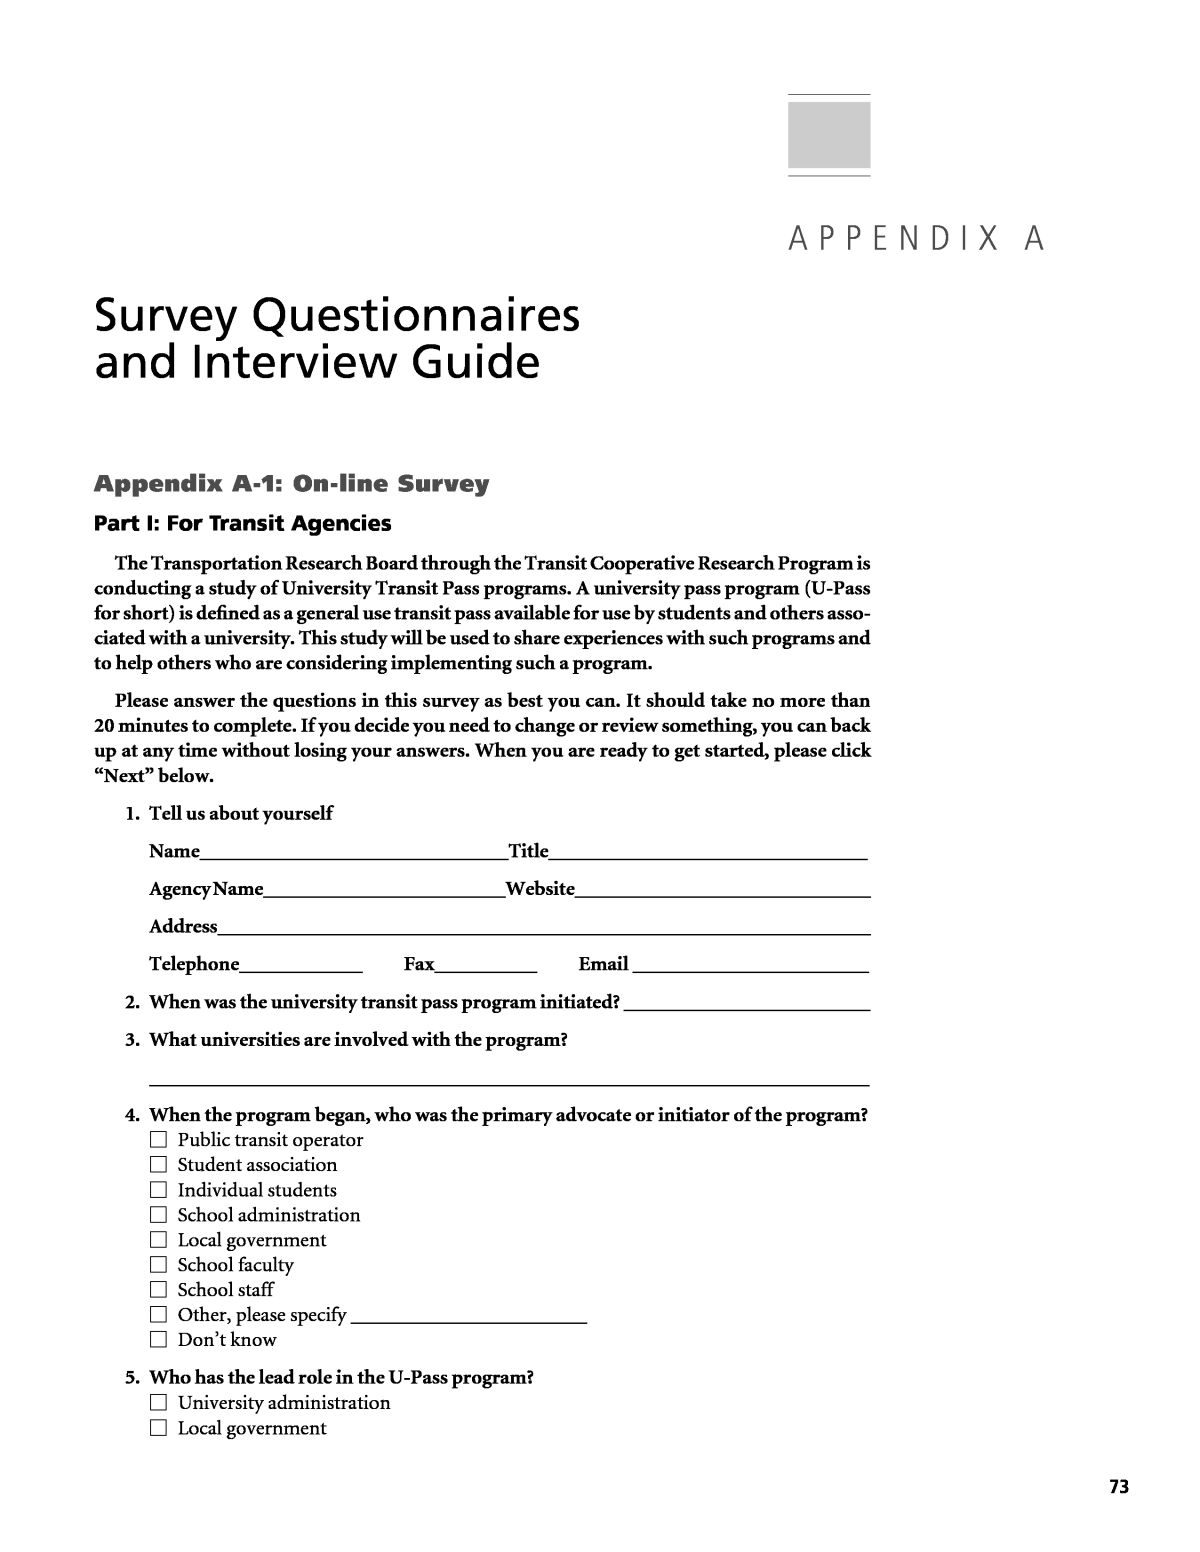 examples of surveys and questionnaires